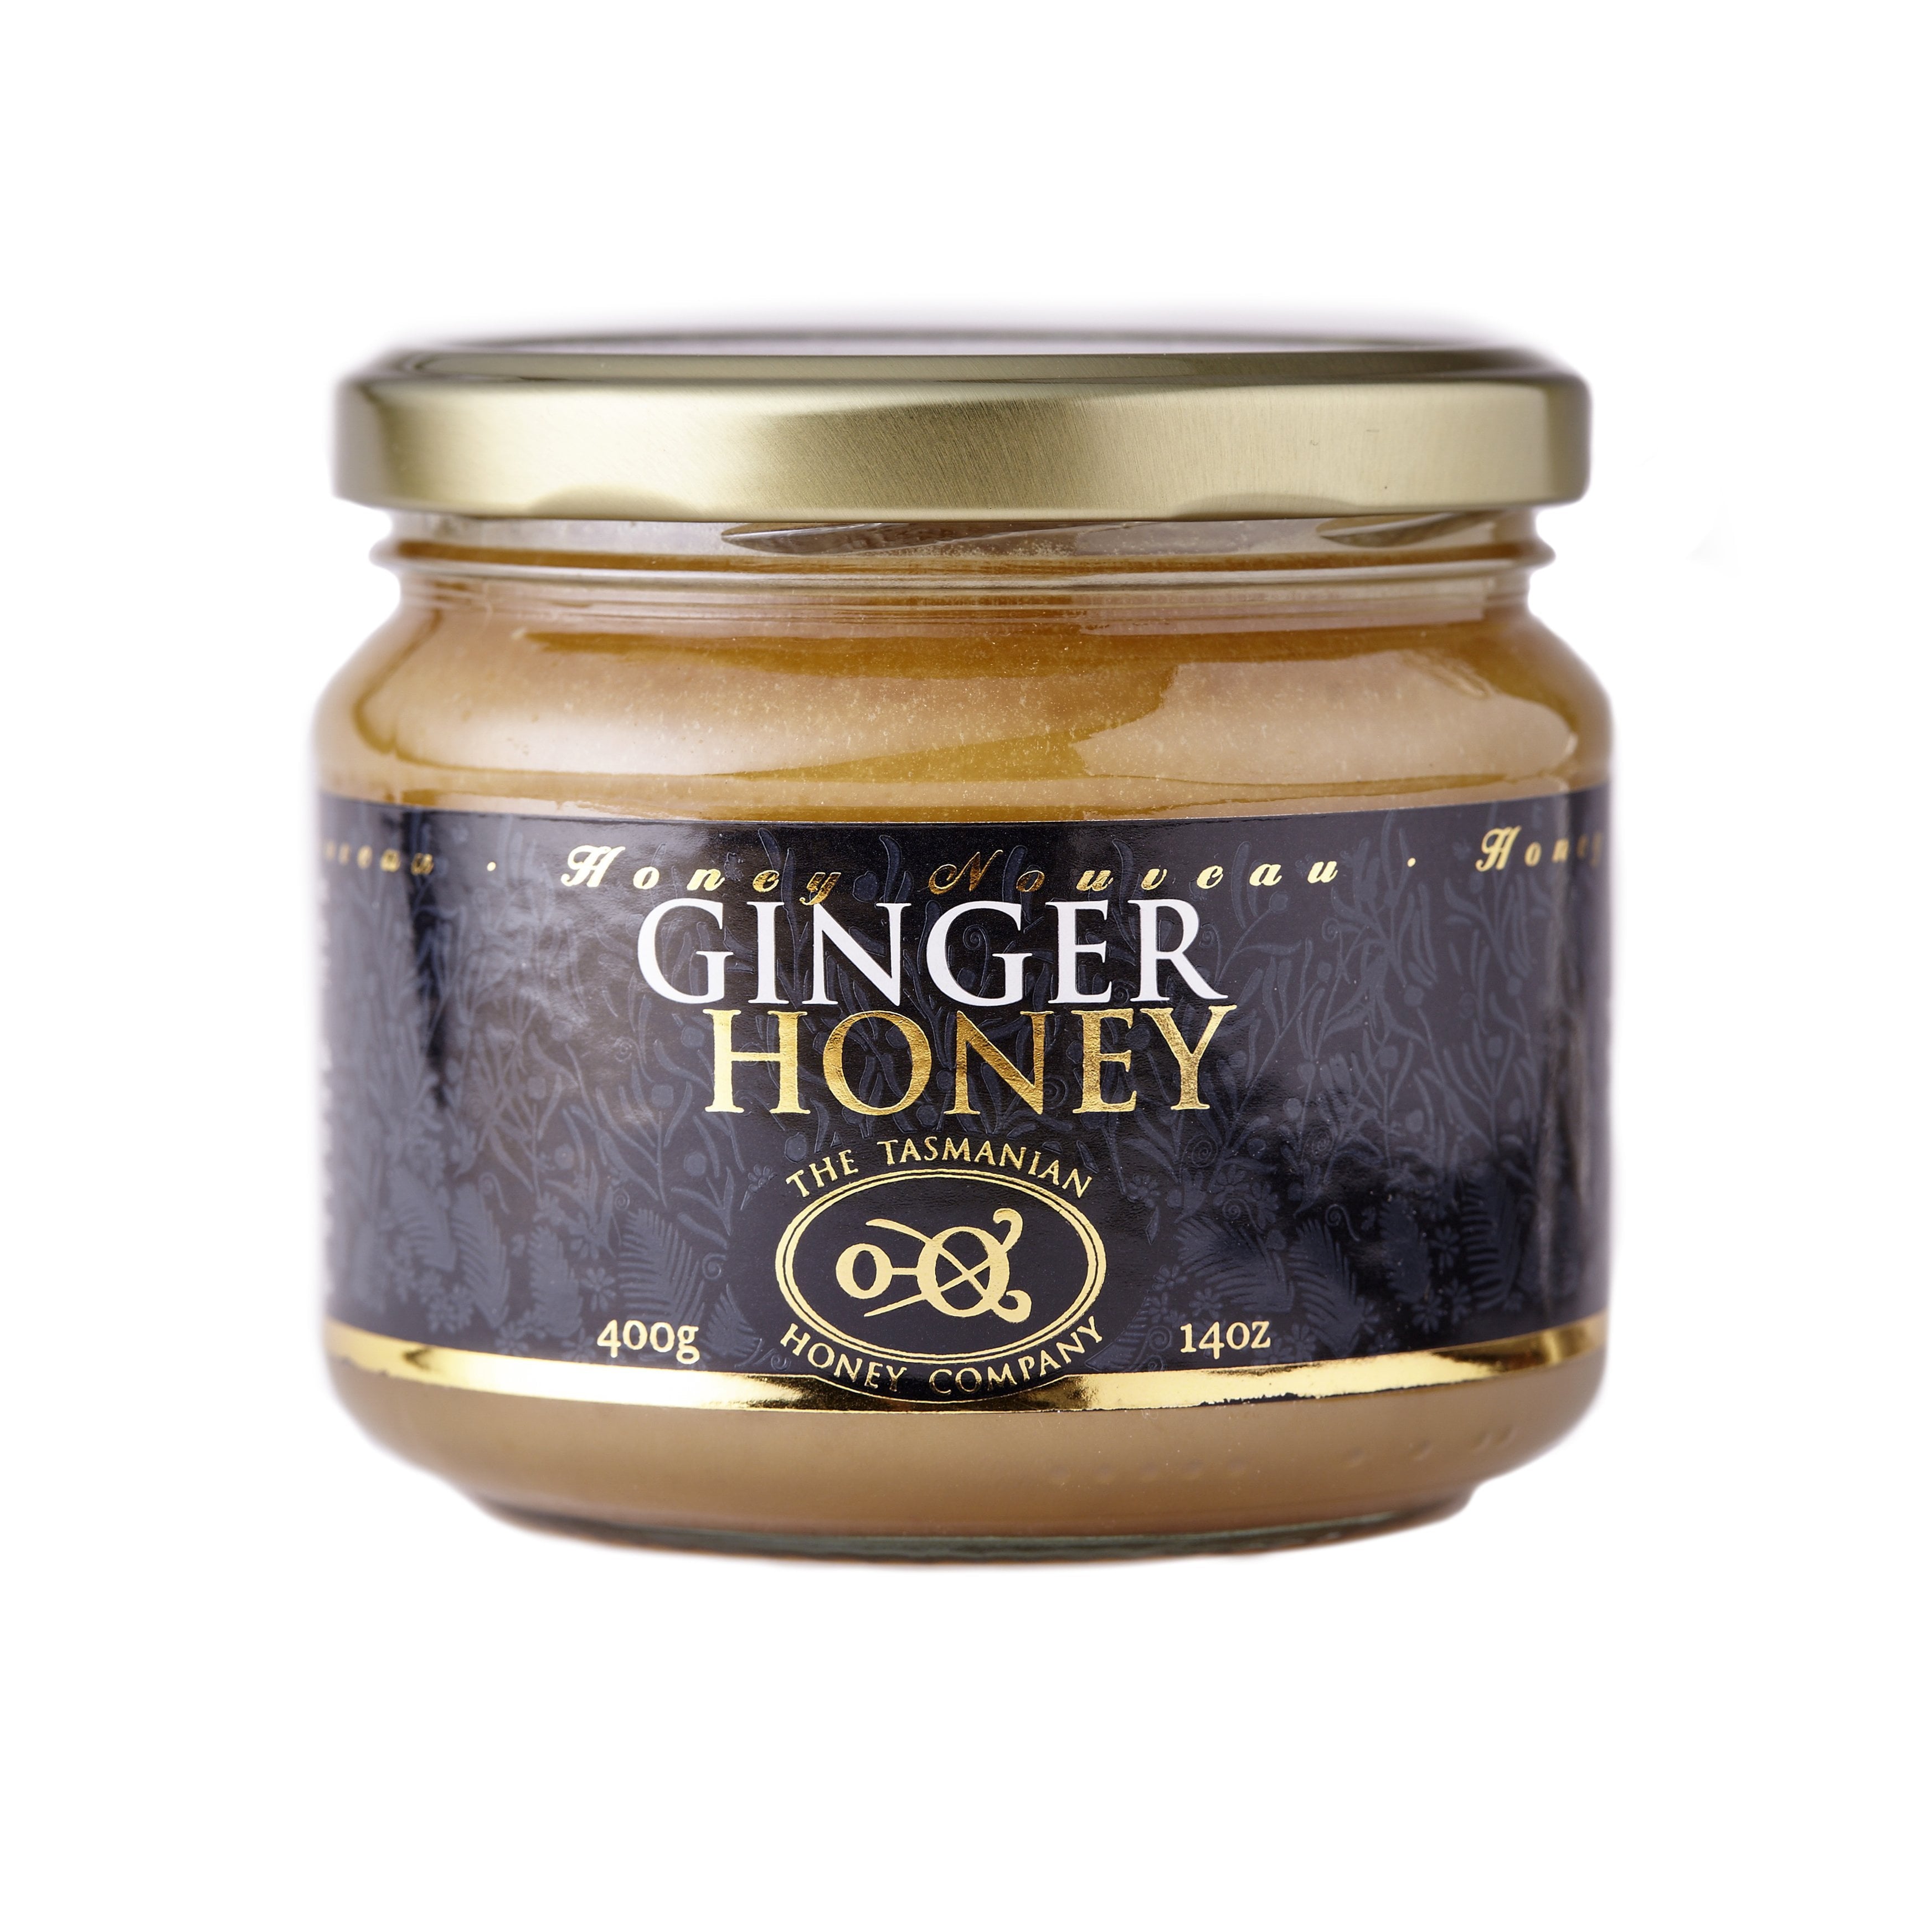 Share Our FB Page and stand to WIN a FREE 400g Tasmanian Ginger Honey!!!